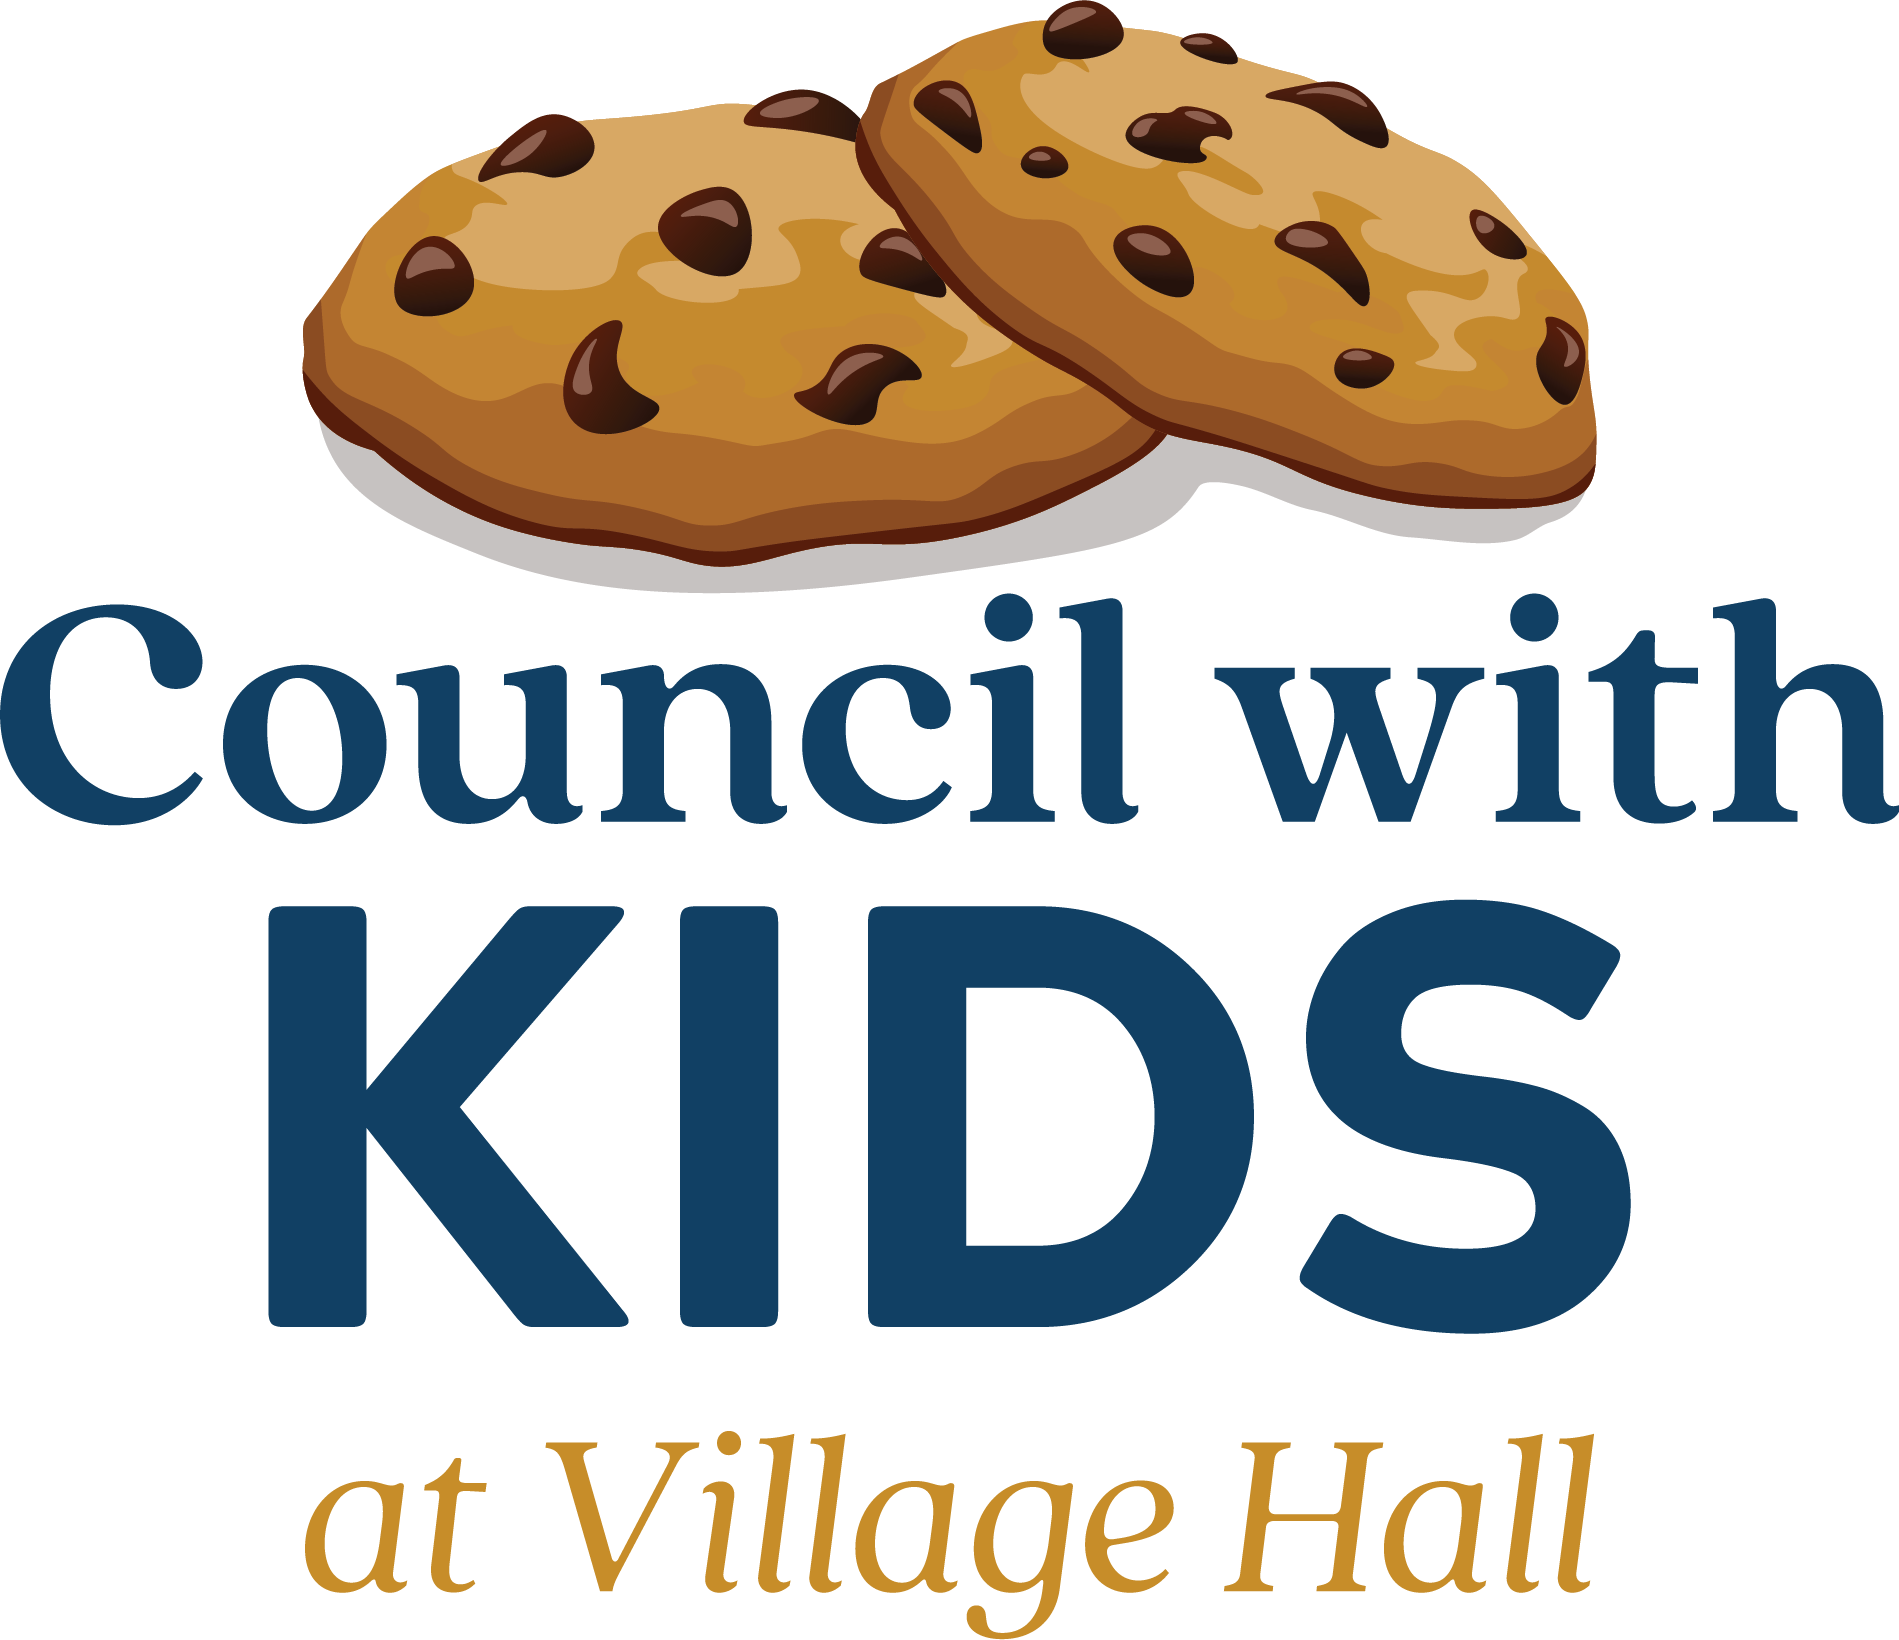 Council with Kids